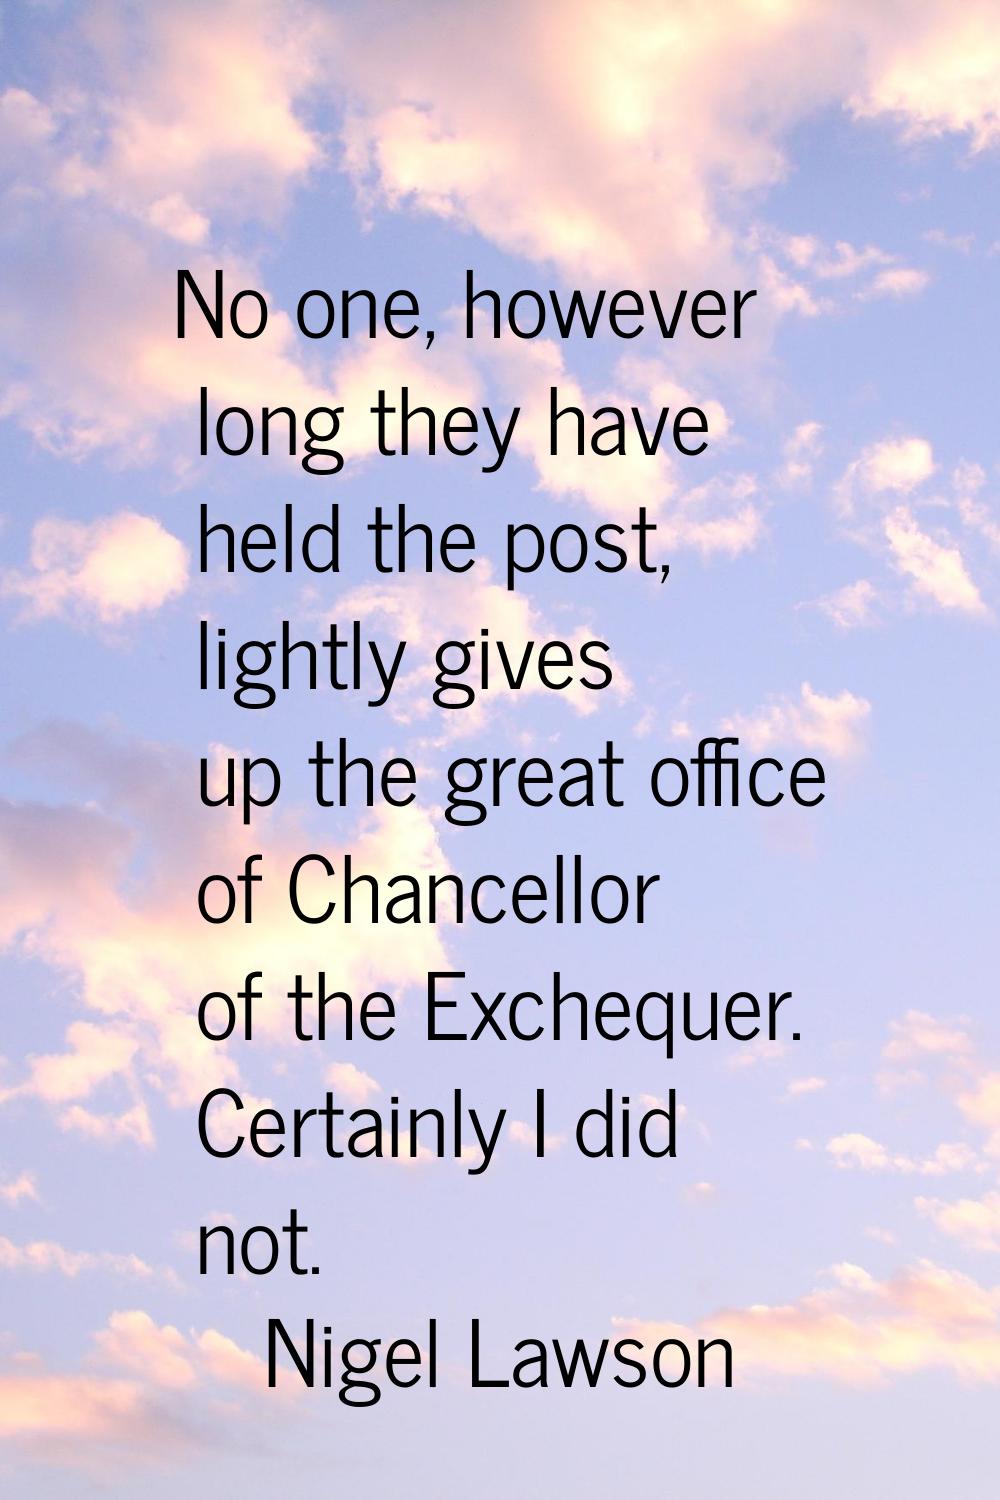 No one, however long they have held the post, lightly gives up the great office of Chancellor of th